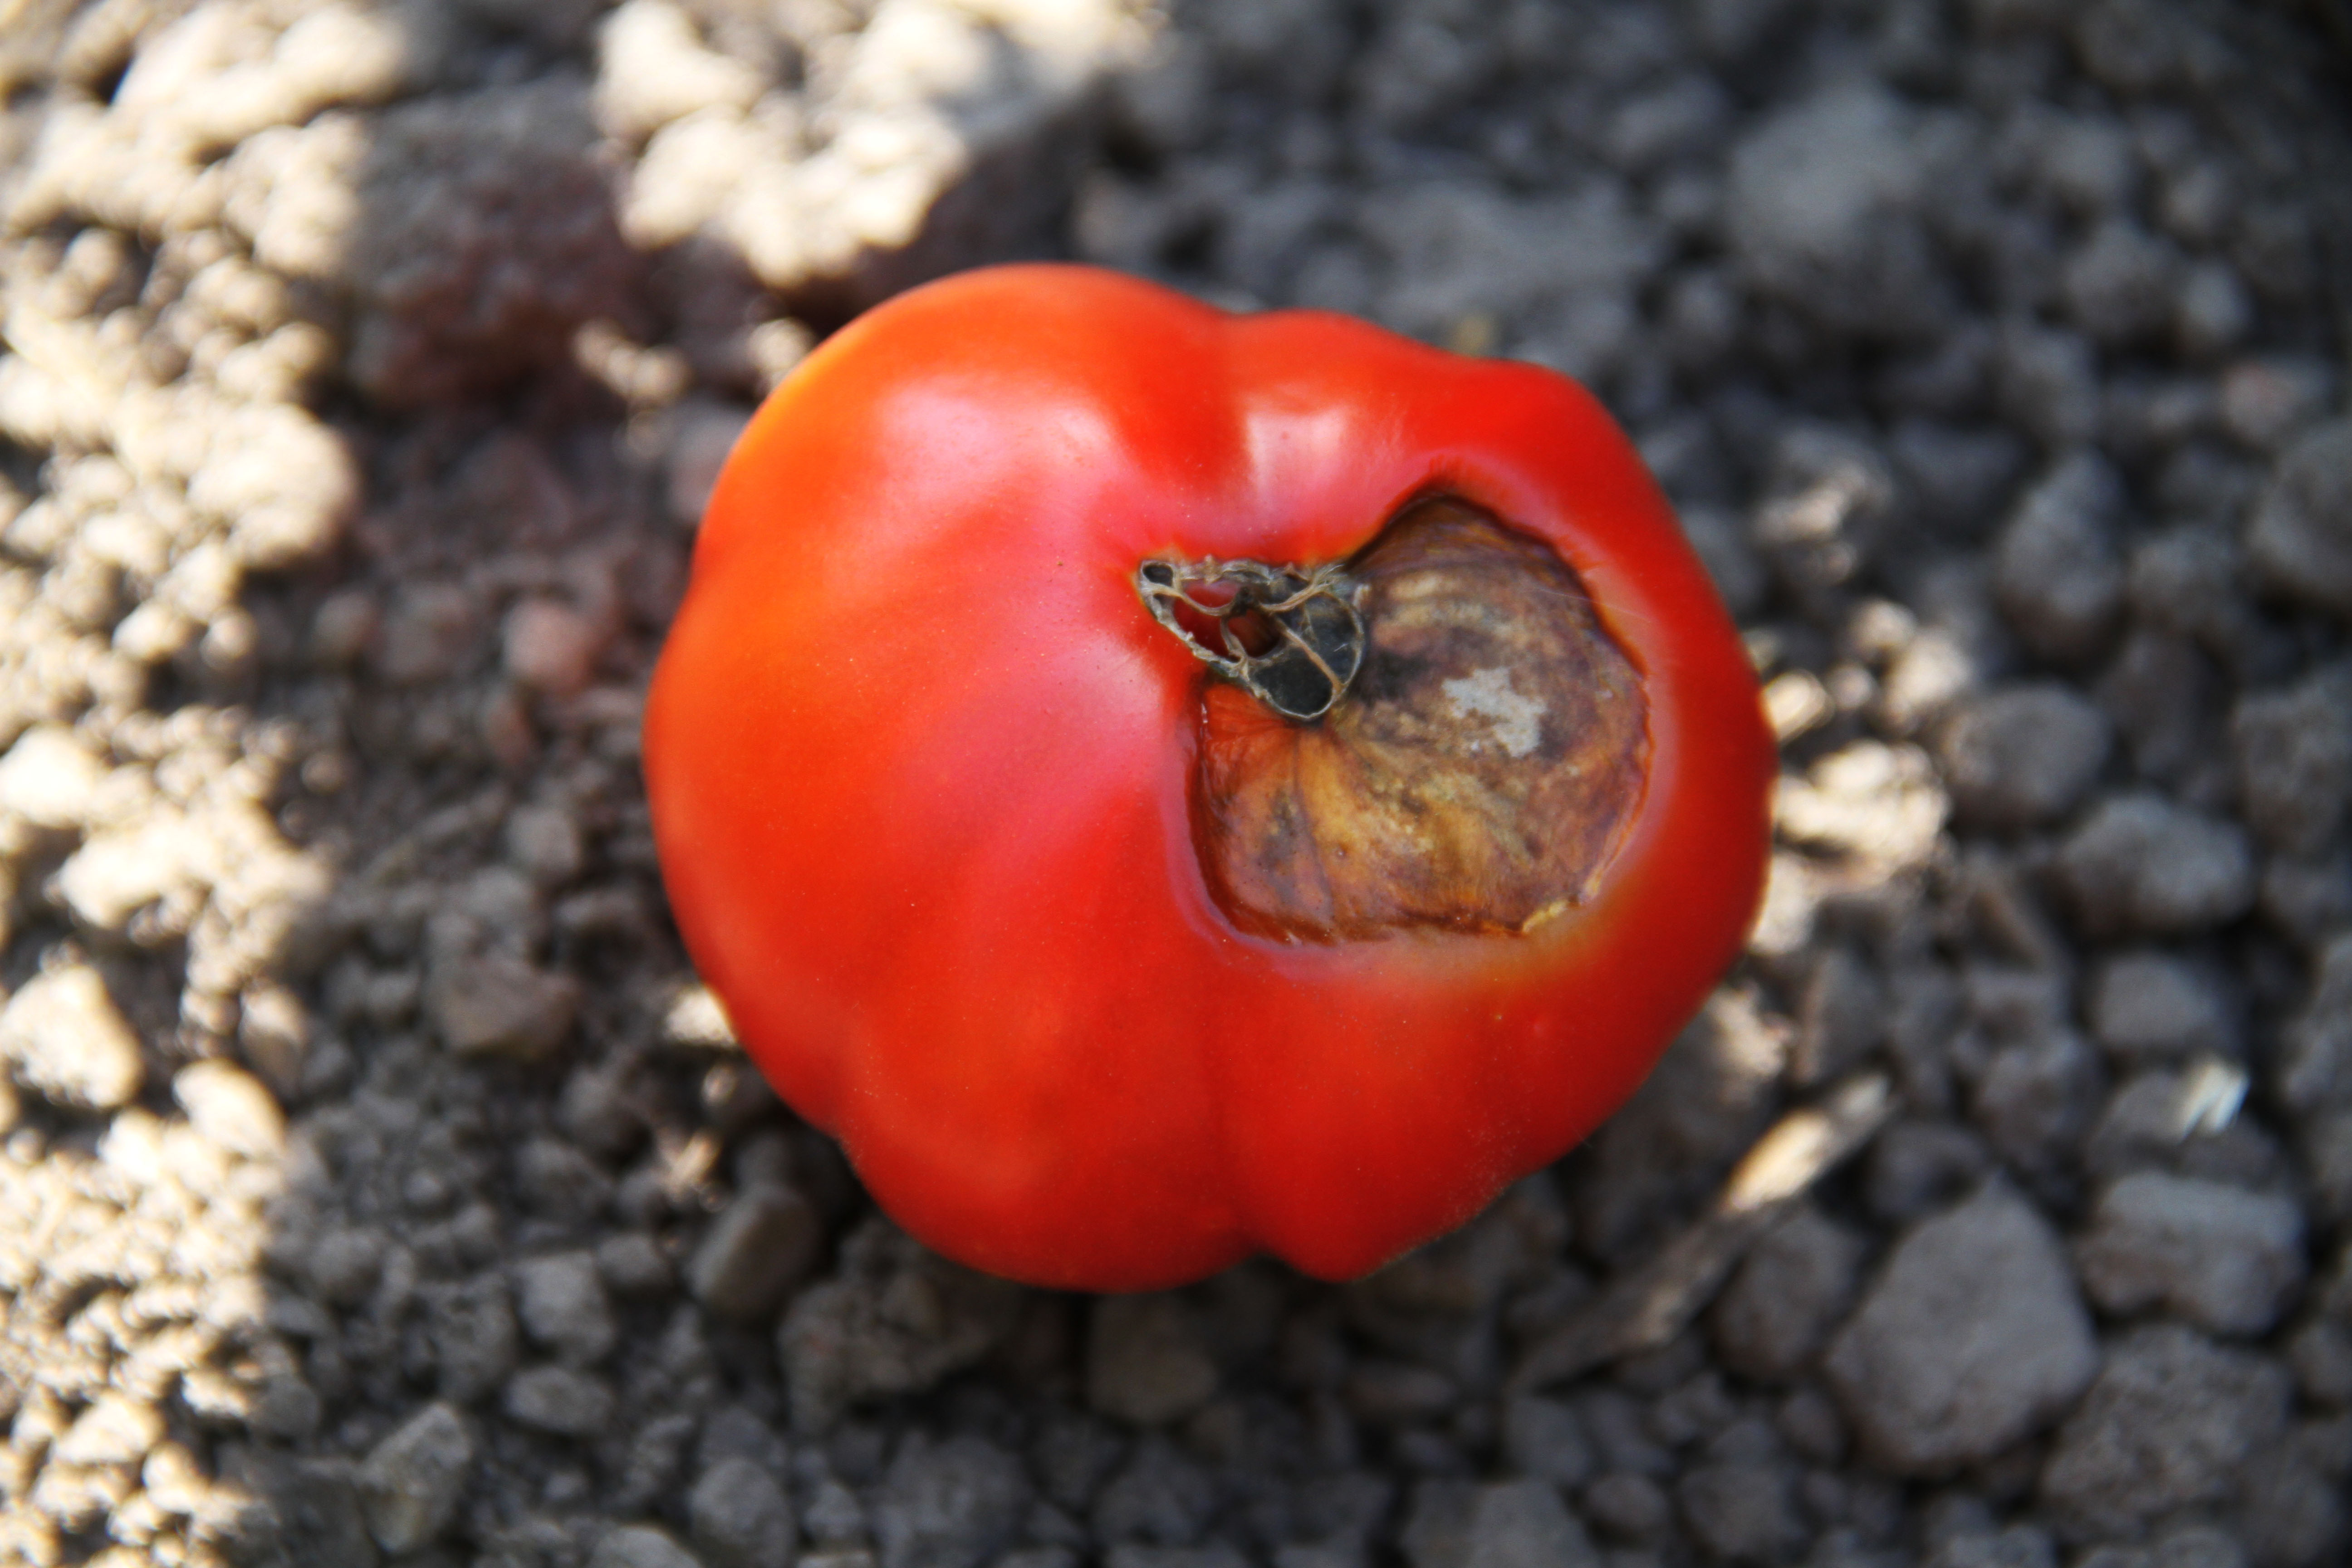 GardenZeus Solutions to Common Abiotic Problems with Garden Tomatoes